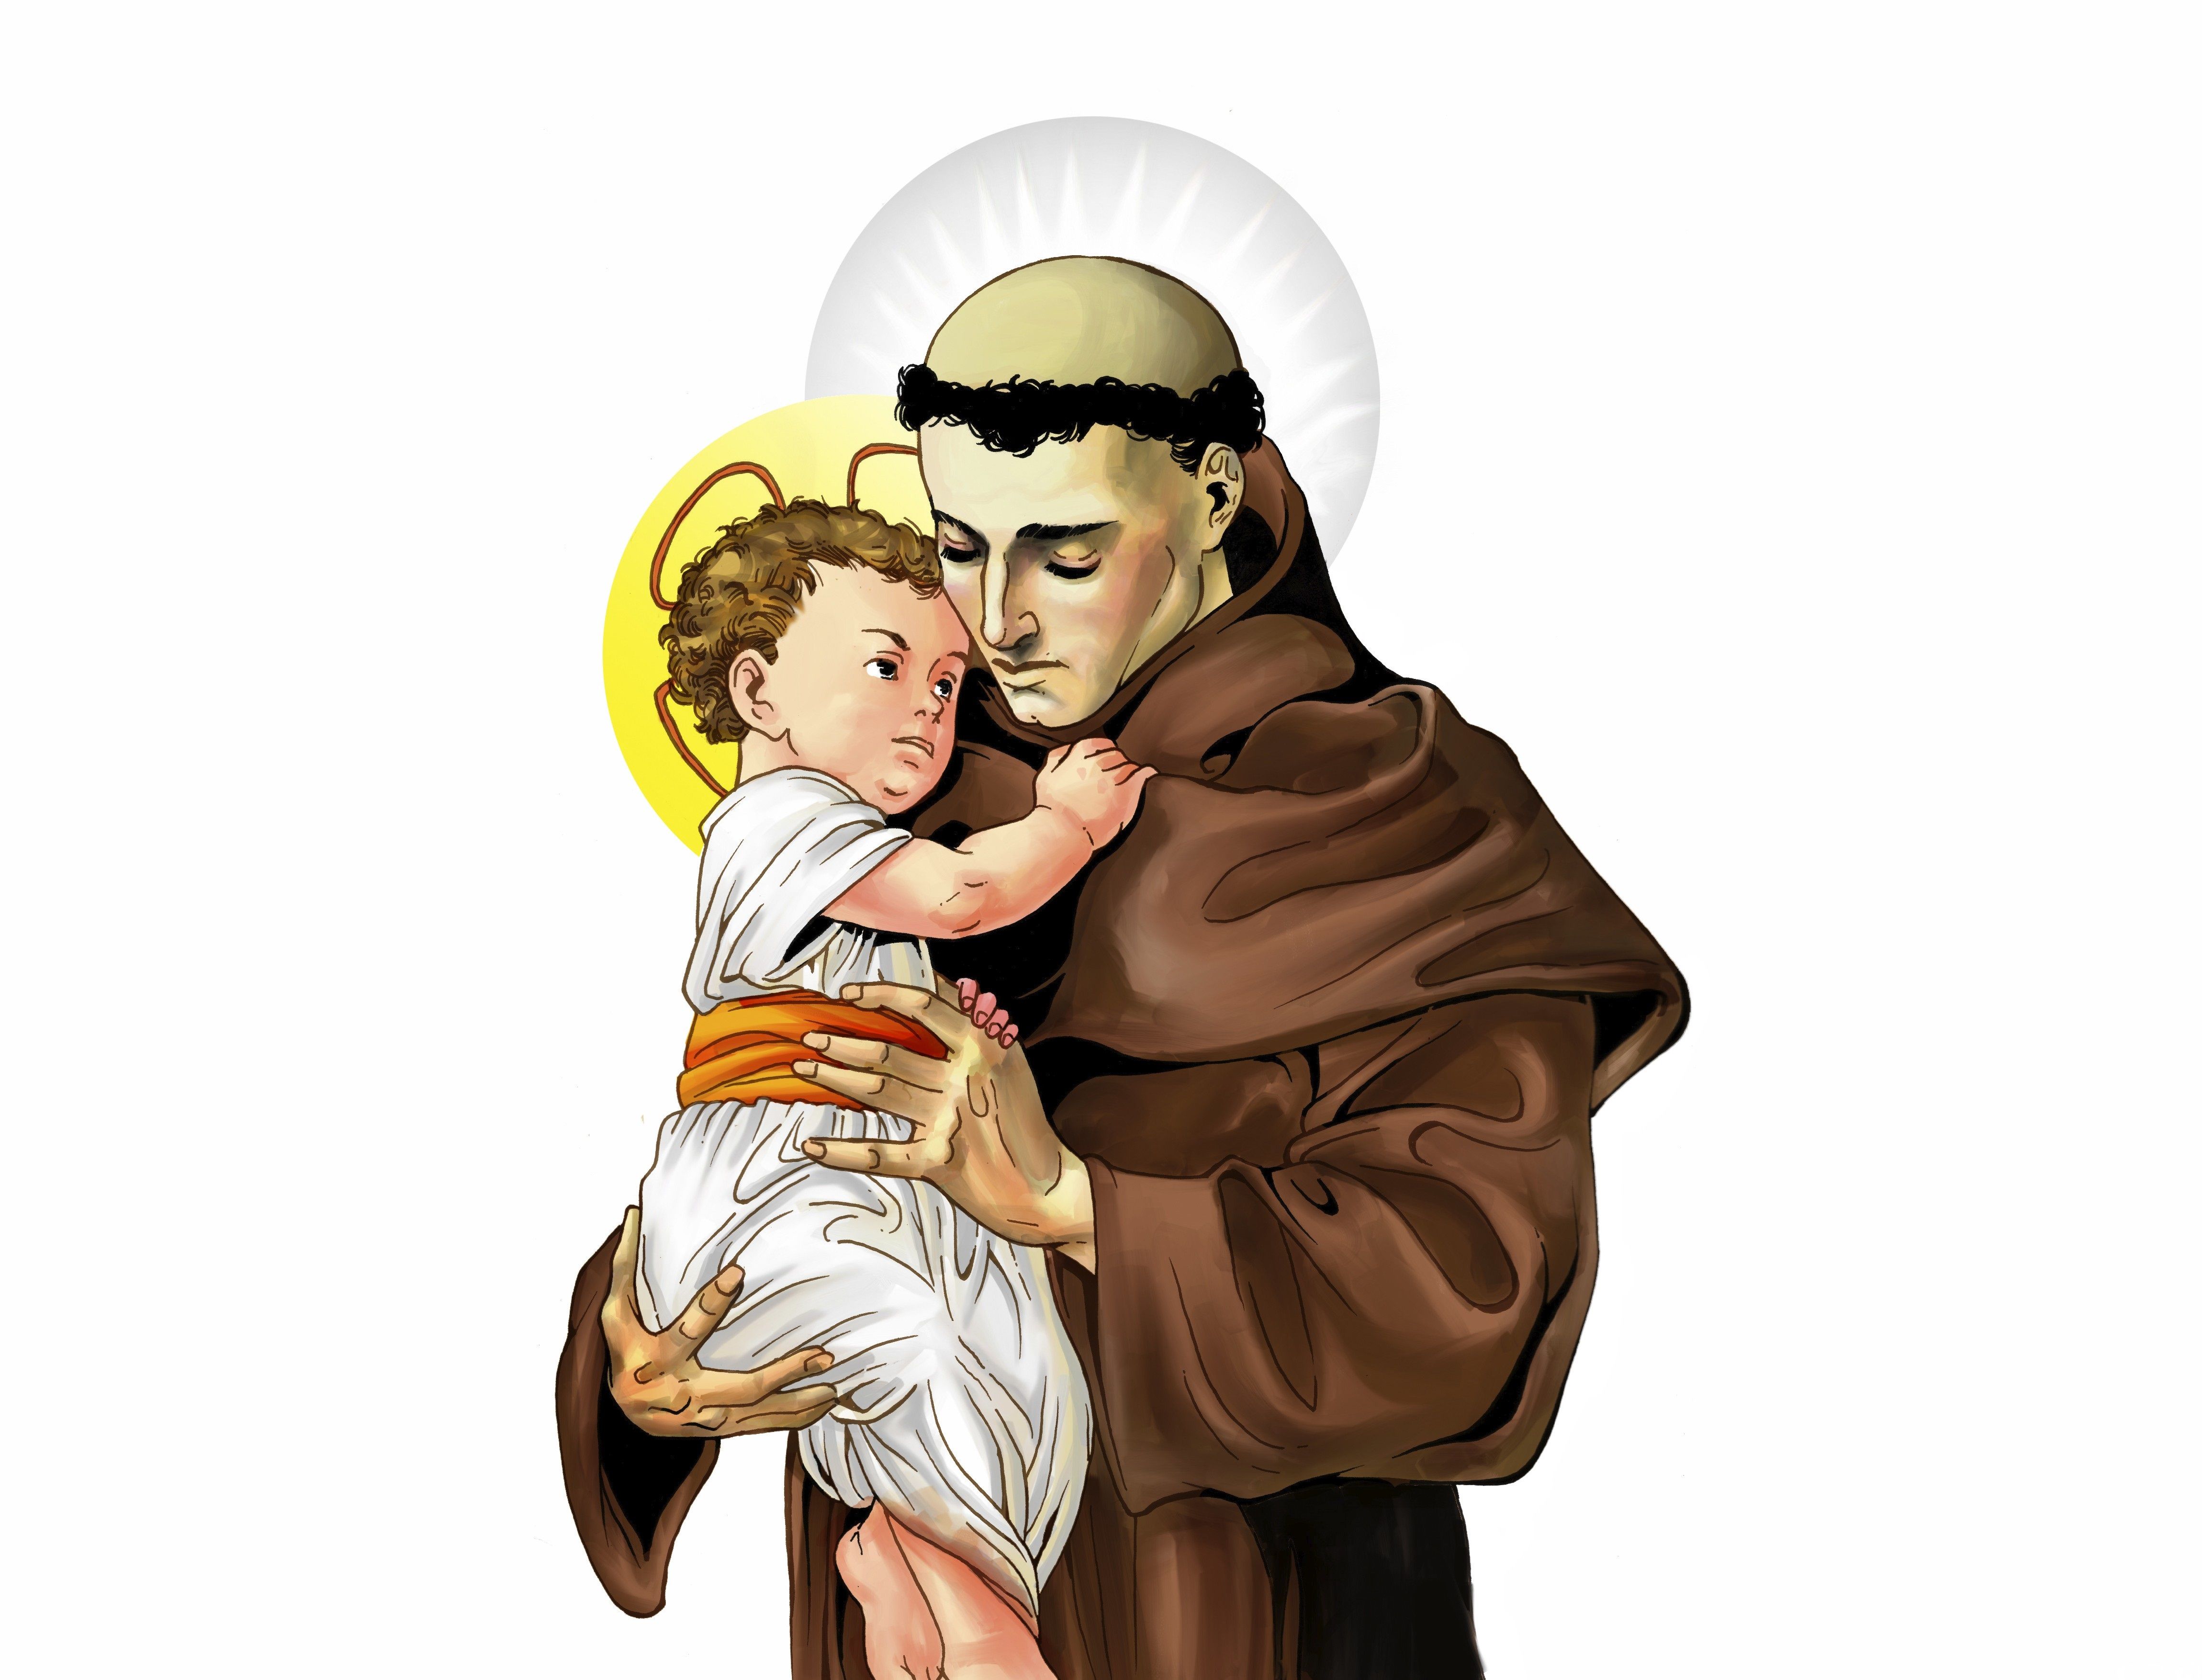 Share more than 134 st anthony hd wallpapers - 3tdesign.edu.vn